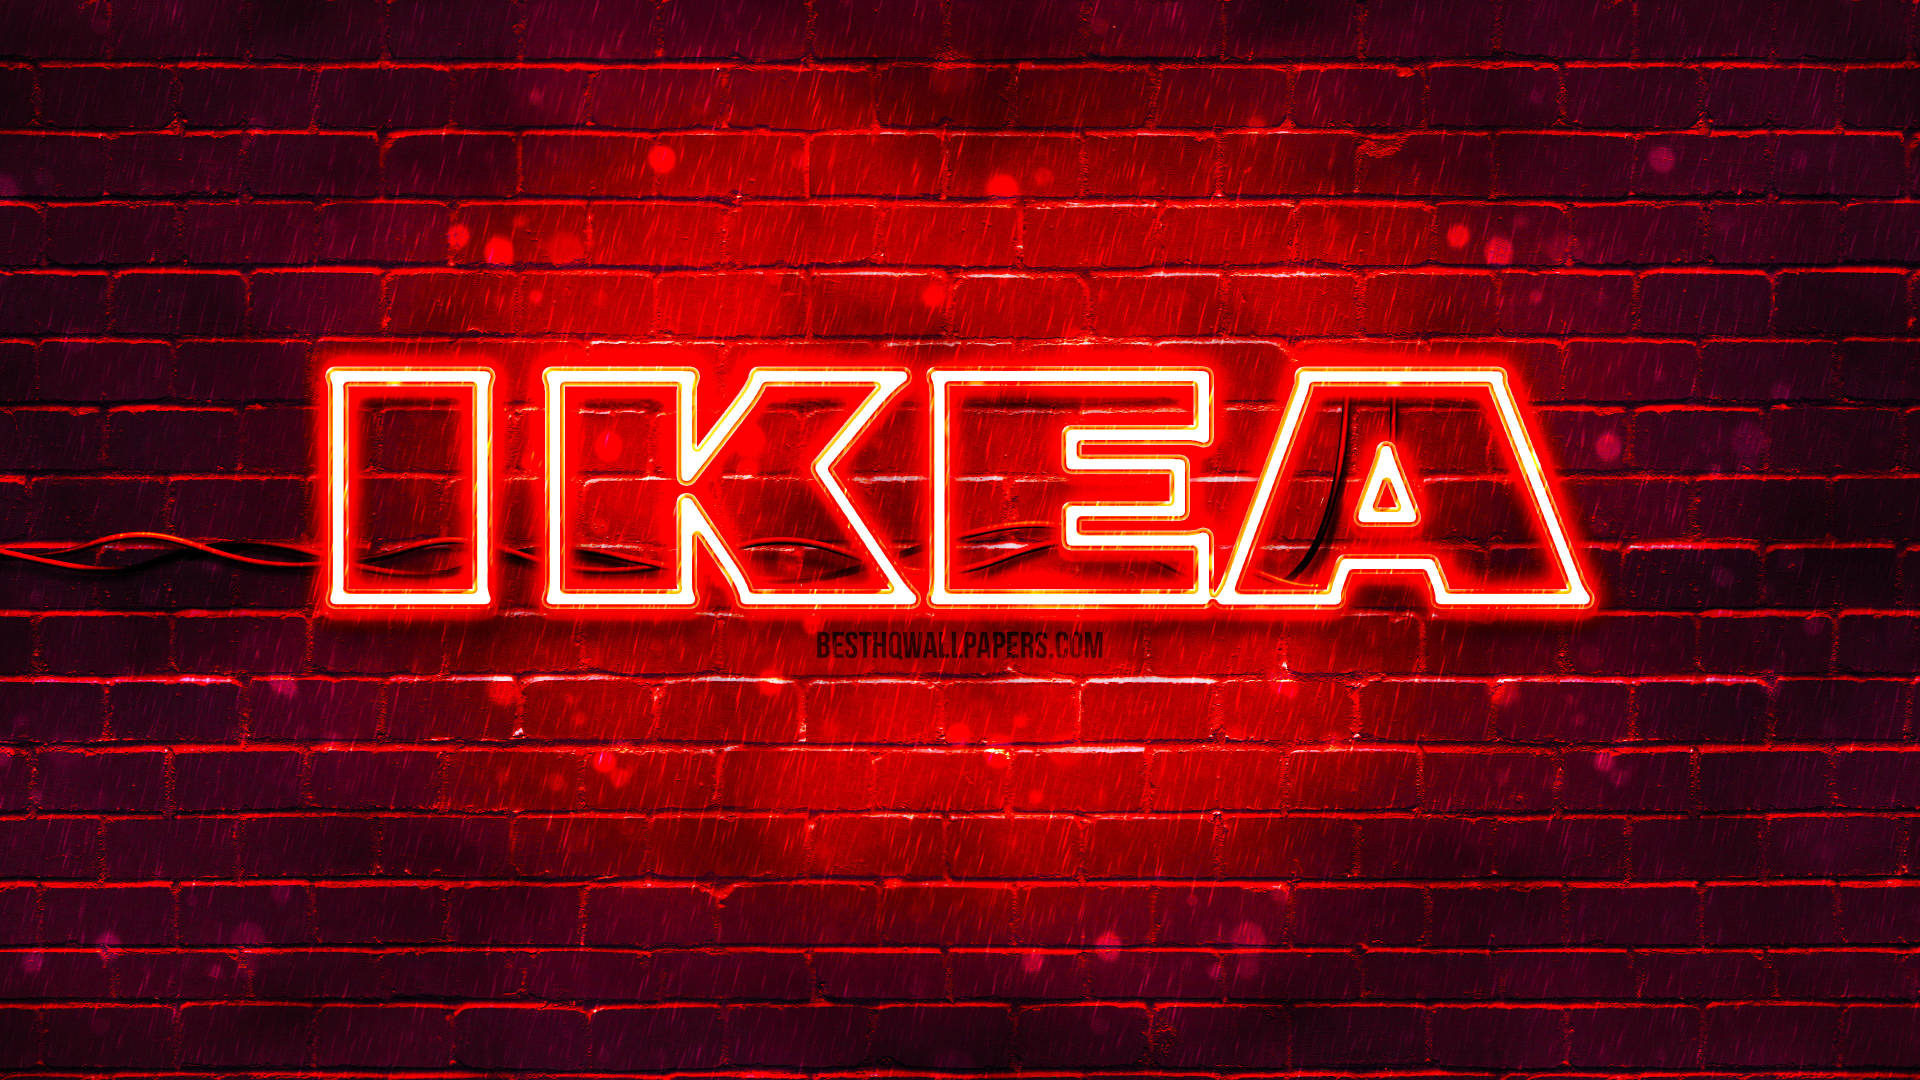 The renowned IKEA logo in vibrant red LED signage against a unique brick accent wall. Wallpaper